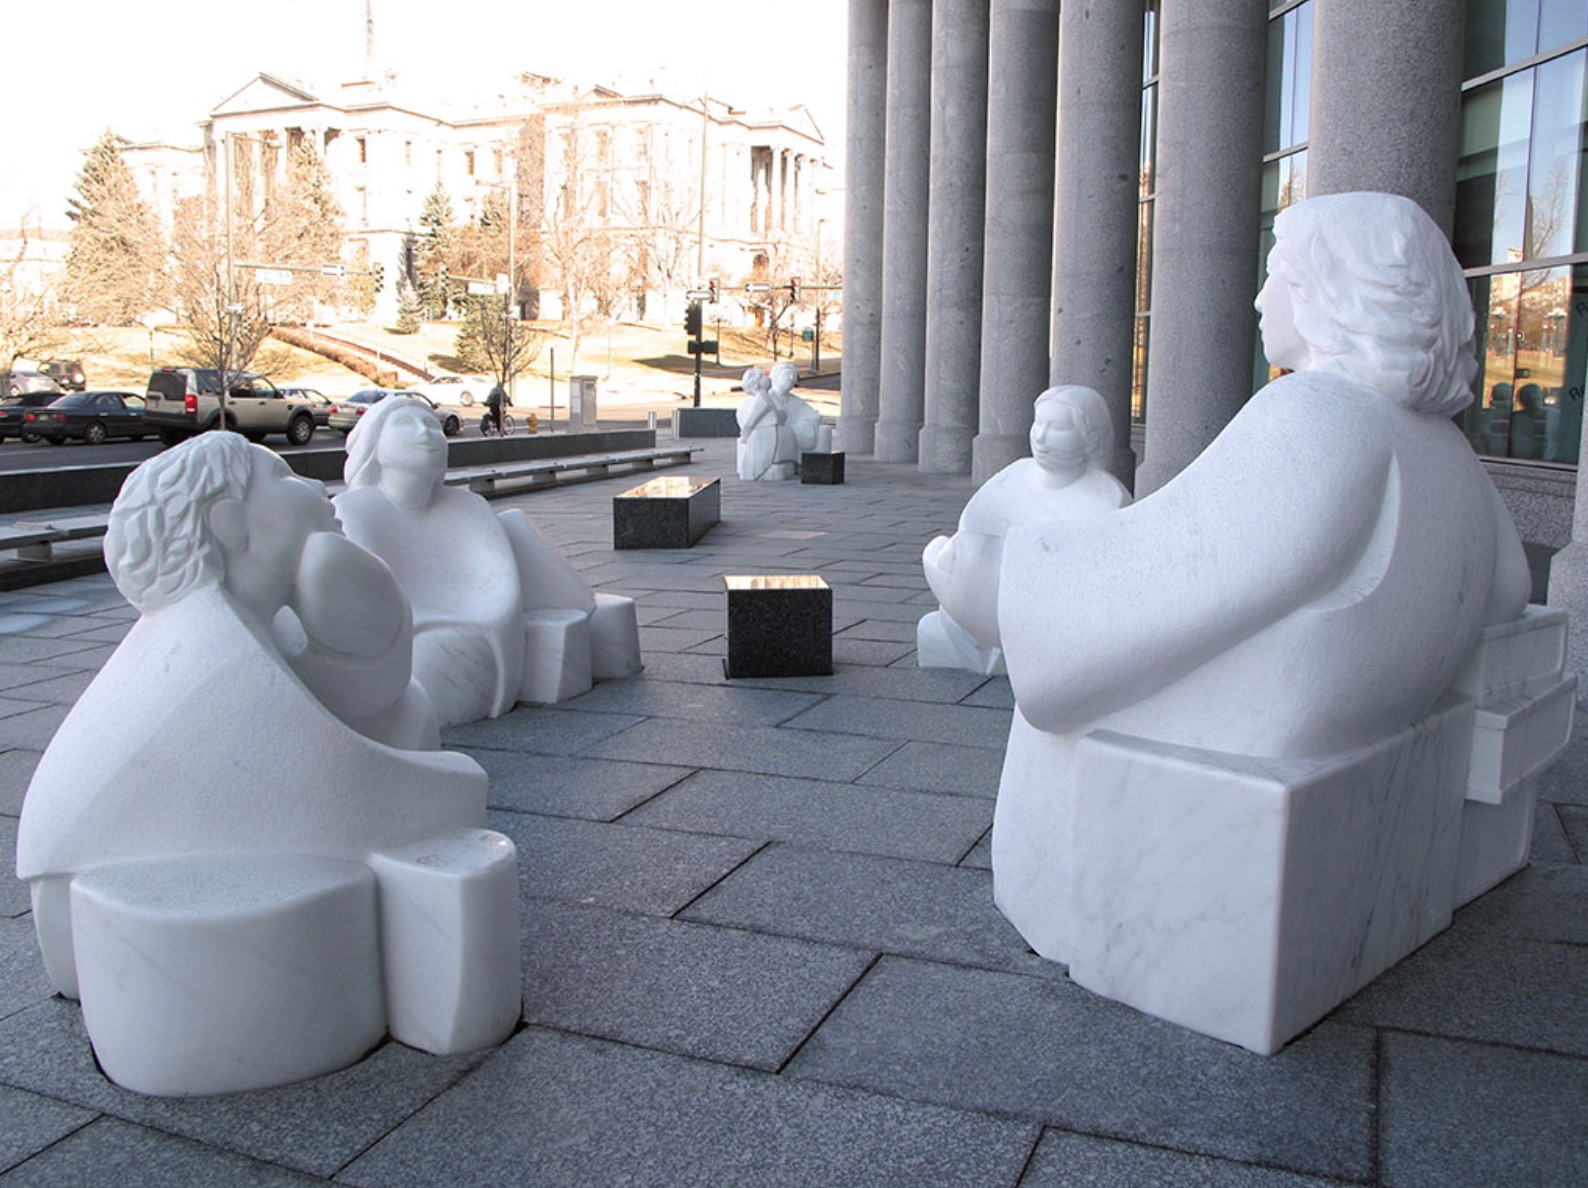 Sculptures resembling people outside a large building. 